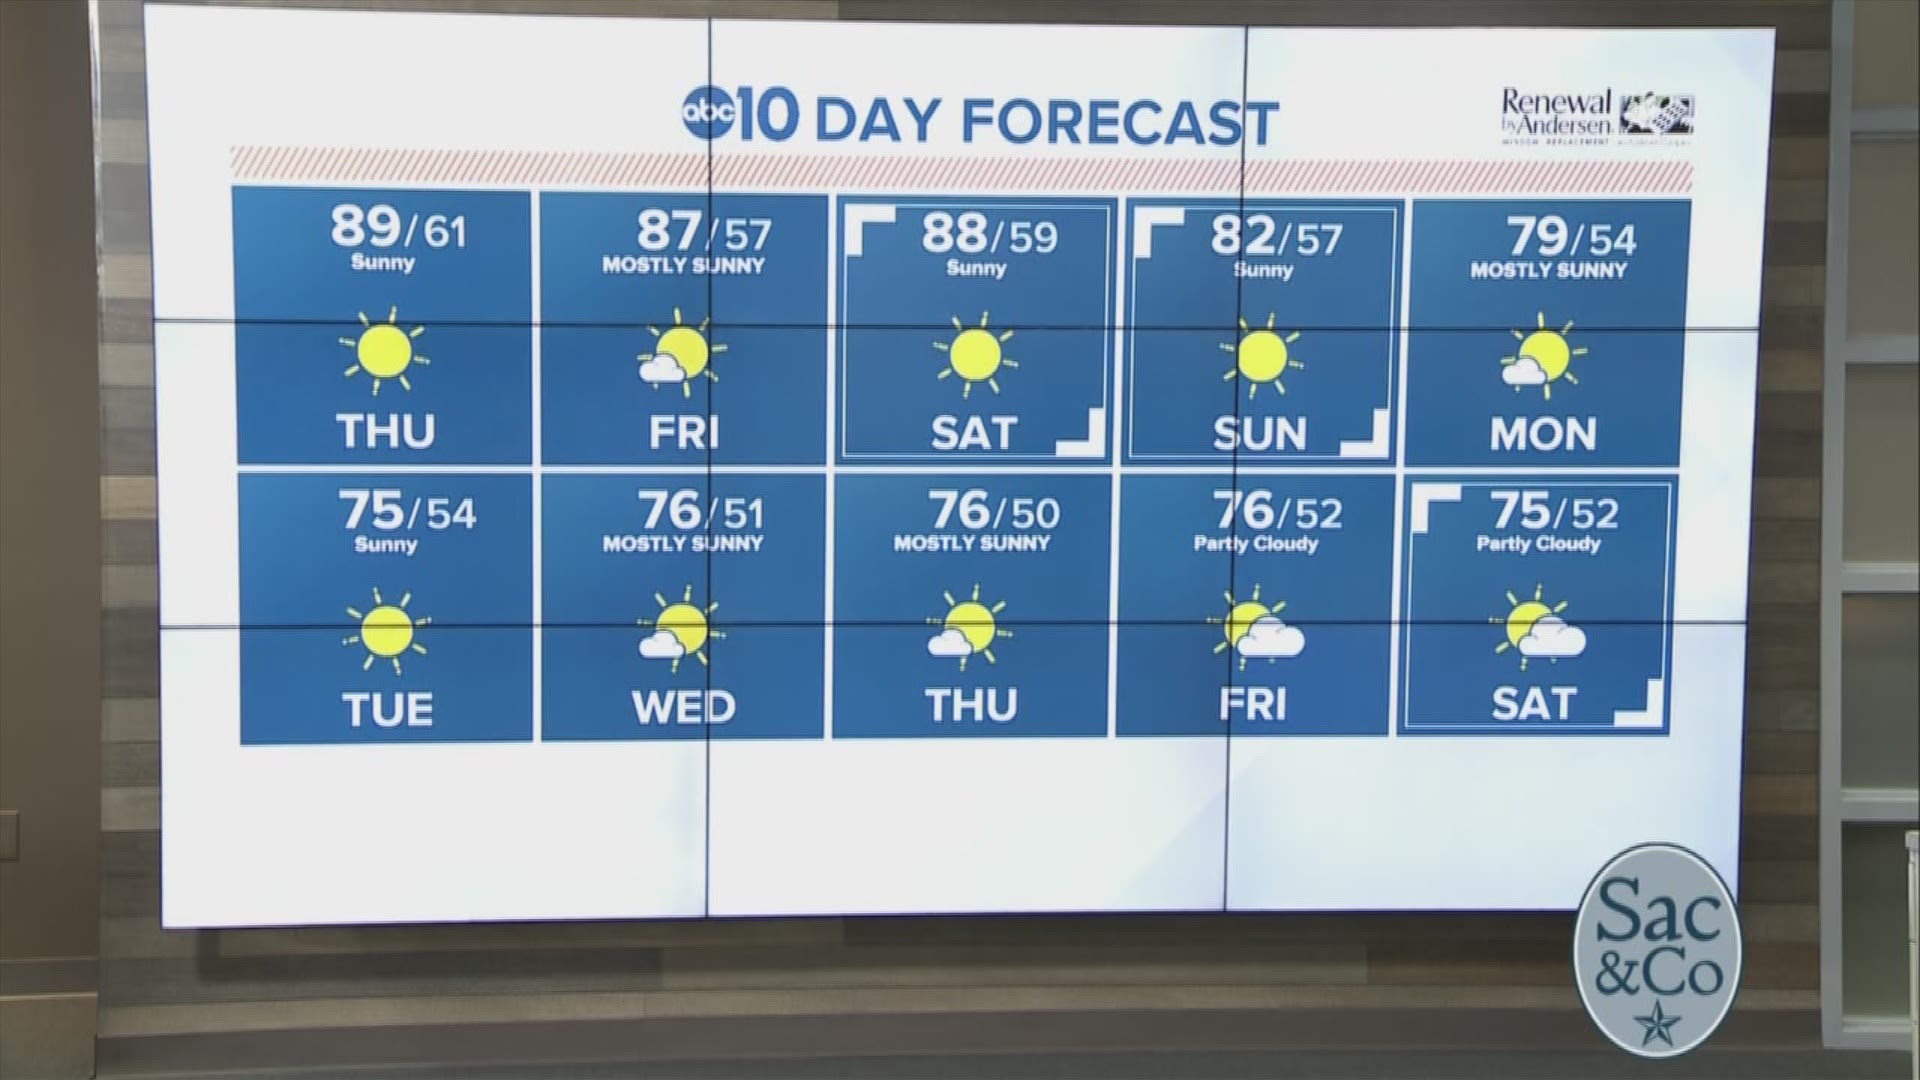 Gradual cooling heading into the weekend